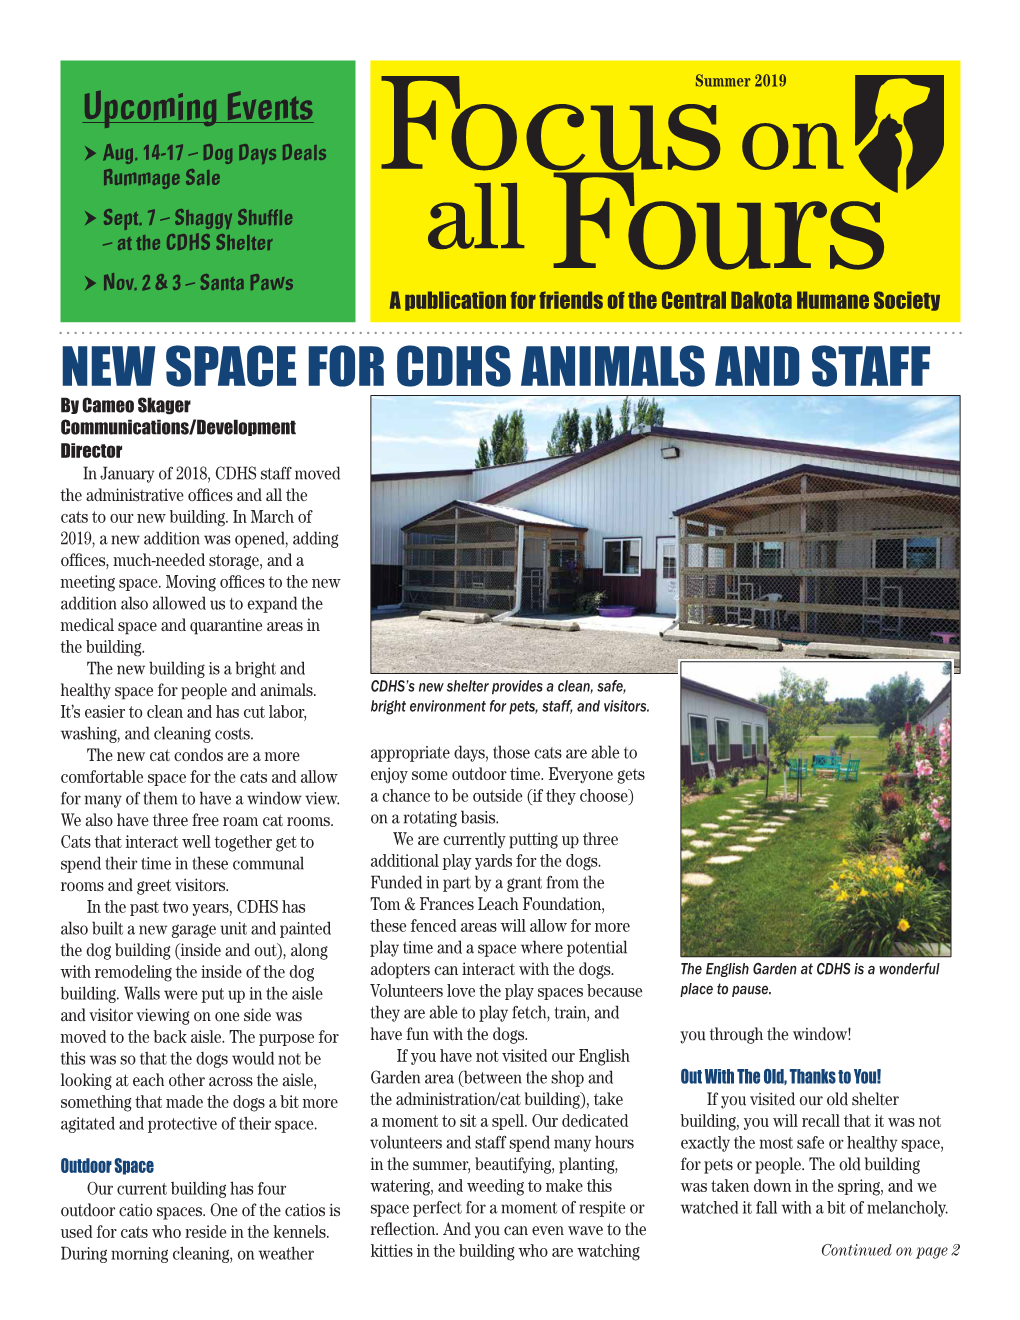 New Space for Cdhs Animals and Staff